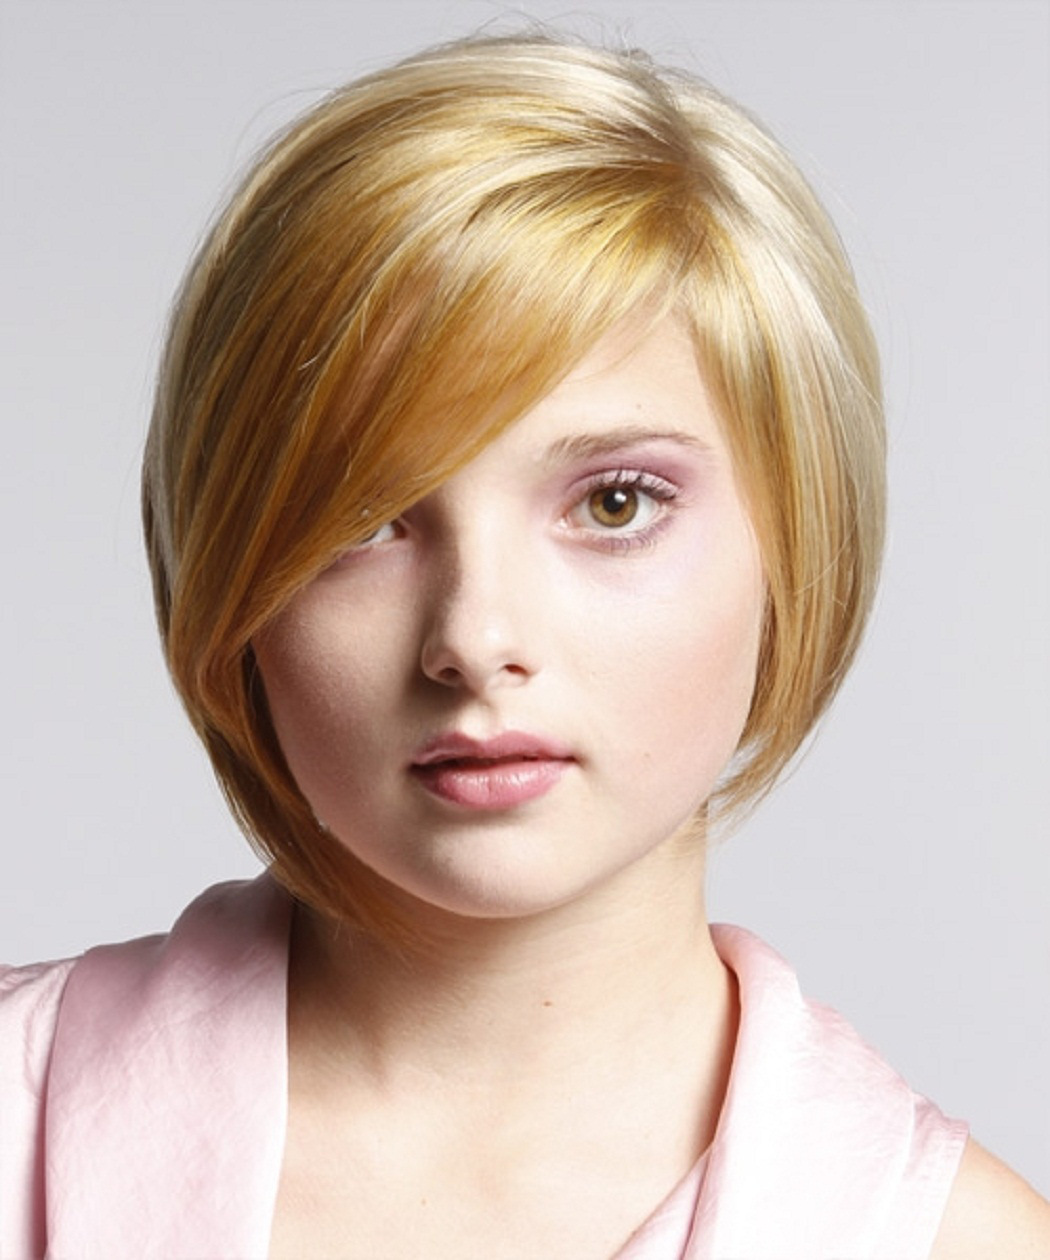 Short hairstyles for round faces short-hairstyles-for-round-faces-87-10